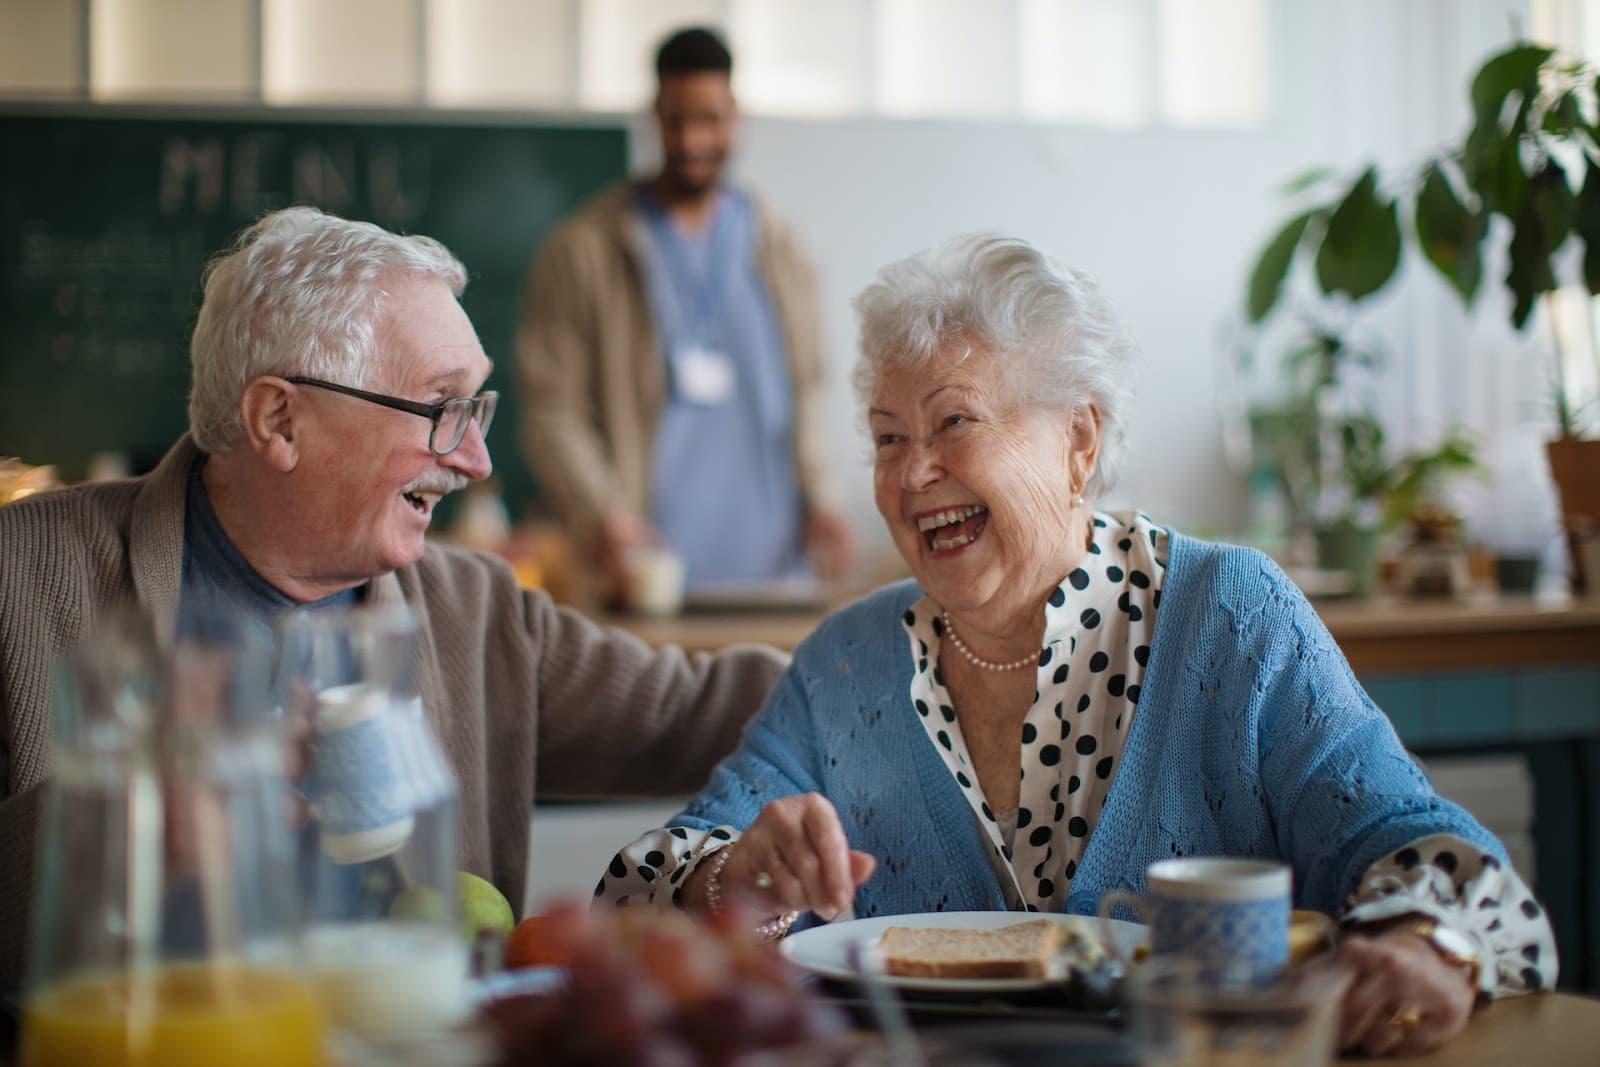 Two elderly people laugh together in a senior living care home